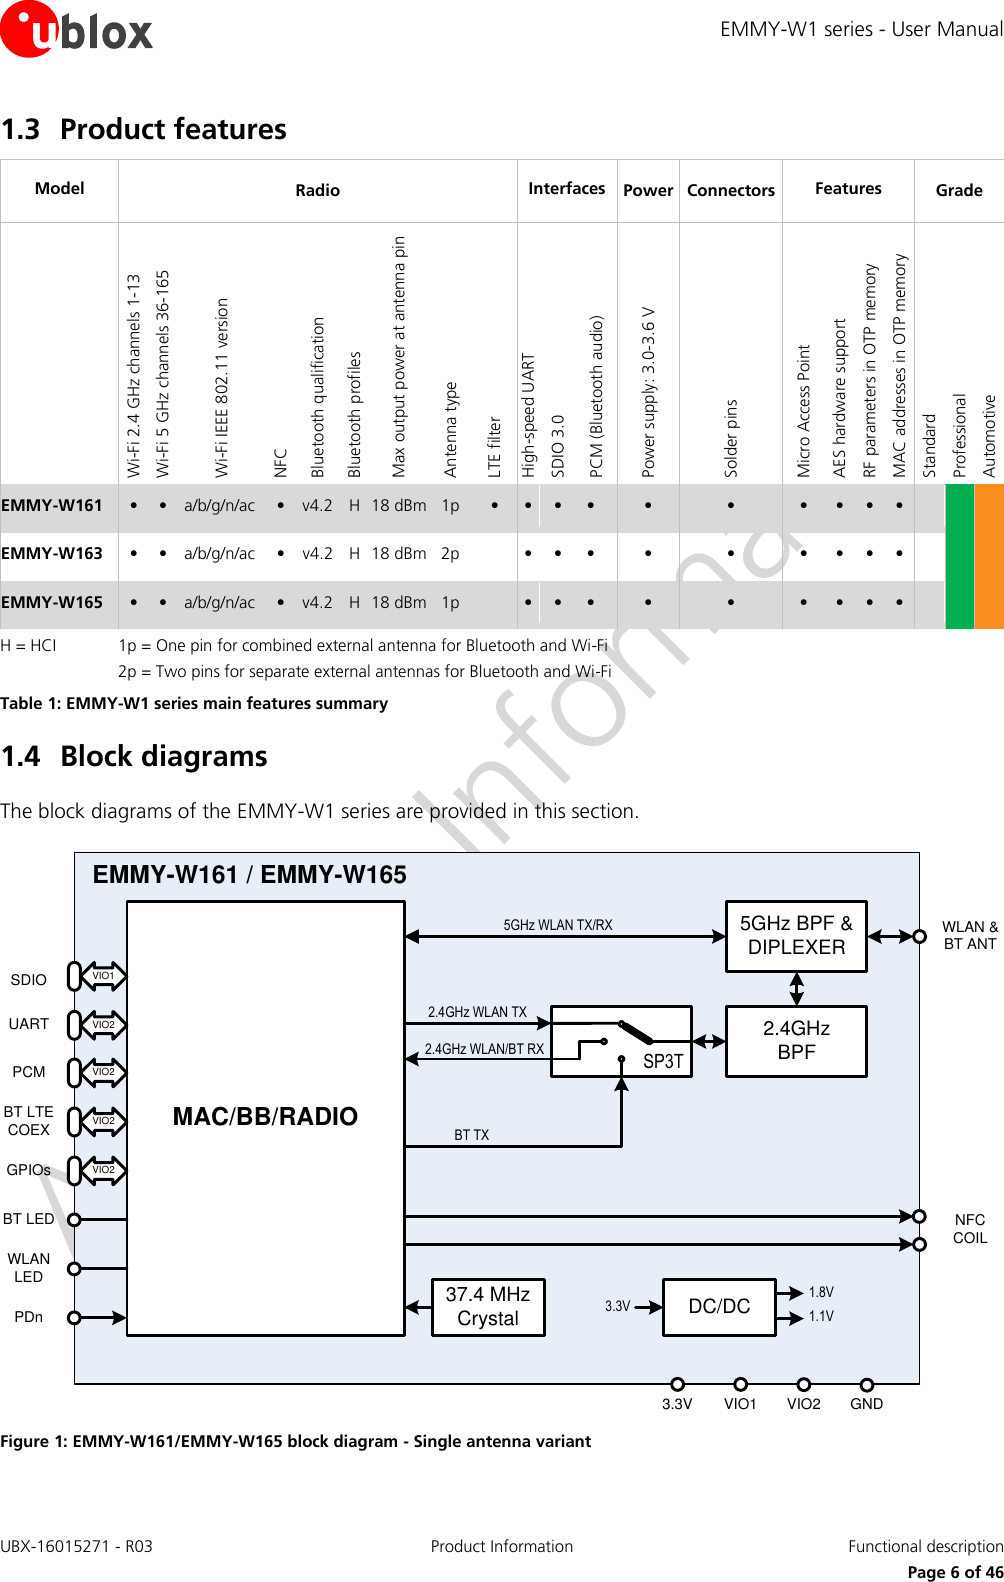 EMMY-W1 series - User Manual UBX-16015271 - R03 Product Information  Functional description     Page 6 of 46 1.3 Product features Model  Radio  Interfaces  Power  Connectors Features  Grade  Wi-Fi 2.4 GHz channels 1-13   Wi-Fi 5 GHz channels 36-165 Wi-Fi IEEE 802.11 version NFC Bluetooth qualification Bluetooth profiles Max output power at antenna pin Antenna type LTE filter High-speed UART SDIO 3.0 PCM (Bluetooth audio) Power supply: 3.0-3.6 V Solder pins Micro Access Point AES hardware support RF parameters in OTP memory MAC addresses in OTP memory Standard Professional Automotive EMMY-W161 • • a/b/g/n/ac  • v4.2   H 18 dBm 1p • • • •  • • • • • •    EMMY-W163 • • a/b/g/n/ac  • v4.2 H 18 dBm 2p  • • •  • • • • • •    EMMY-W165 • • a/b/g/n/ac  • v4.2   H 18 dBm 1p  • • •  • • • • • •    H = HCI  1p = One pin for combined external antenna for Bluetooth and Wi-Fi    2p = Two pins for separate external antennas for Bluetooth and Wi-Fi Table 1: EMMY-W1 series main features summary 1.4 Block diagrams The block diagrams of the EMMY-W1 series are provided in this section.  Figure 1: EMMY-W161/EMMY-W165 block diagram - Single antenna variant MAC/BB/RADIO2.4GHz WLAN TX2.4GHz WLAN/BT RXBT TXWLAN &amp;BT ANT5GHz WLAN TX/RX 5GHz BPF &amp;DIPLEXER2.4GHzBPFEMMY-W161 / EMMY-W165SDIO37.4 MHzCrystalVIO1UART VIO2PCM VIO2BT LTE COEX VIO2BT LEDWLAN LEDPDnSP3T3.3V VIO1 VIO2 GNDNFCCOILVIO2GPIOsDC/DC3.3V1.8V1.1V